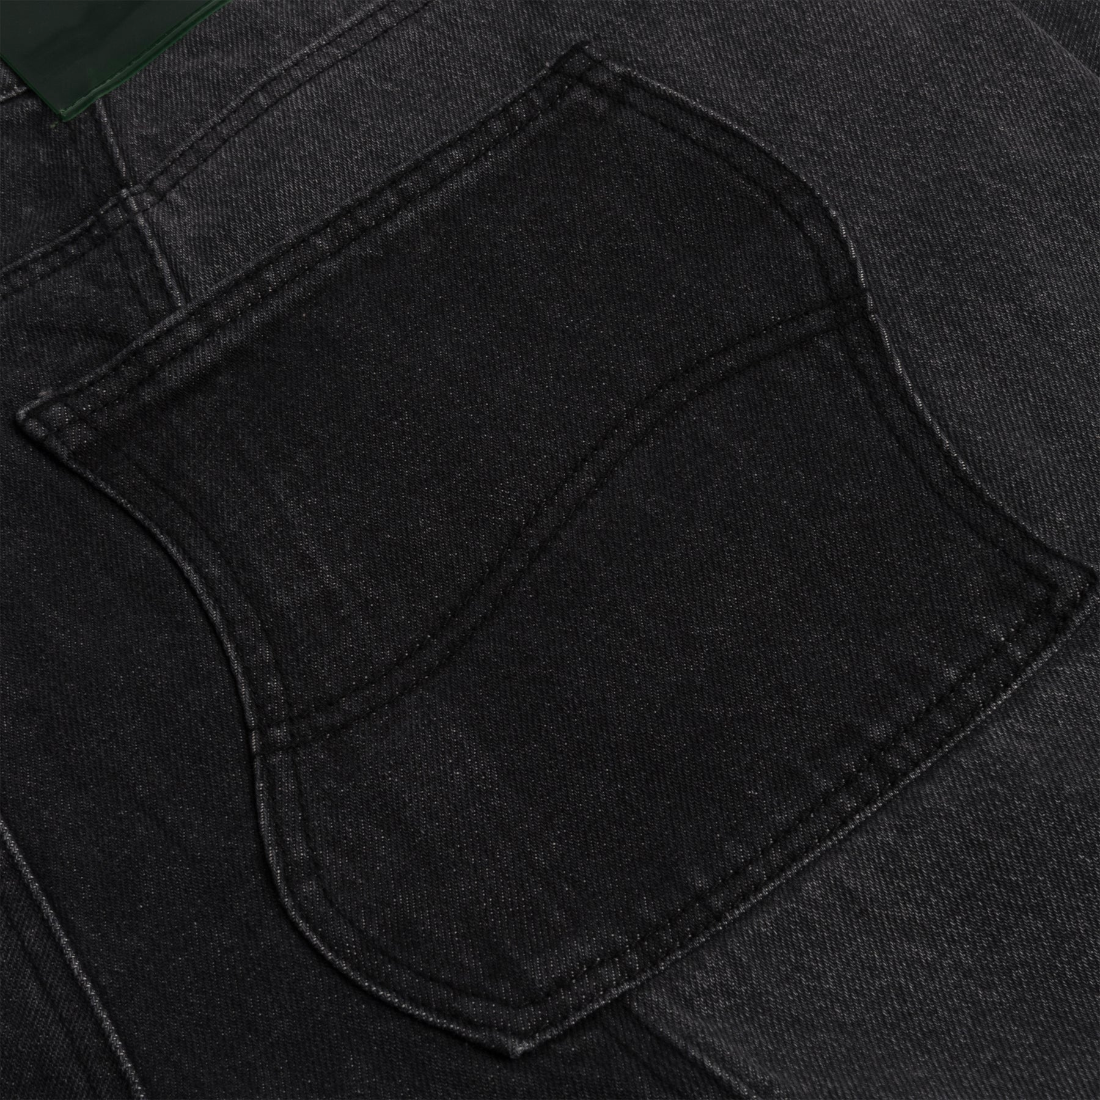 【Dime】Blocked Relaxed Denim Pants - Black washed